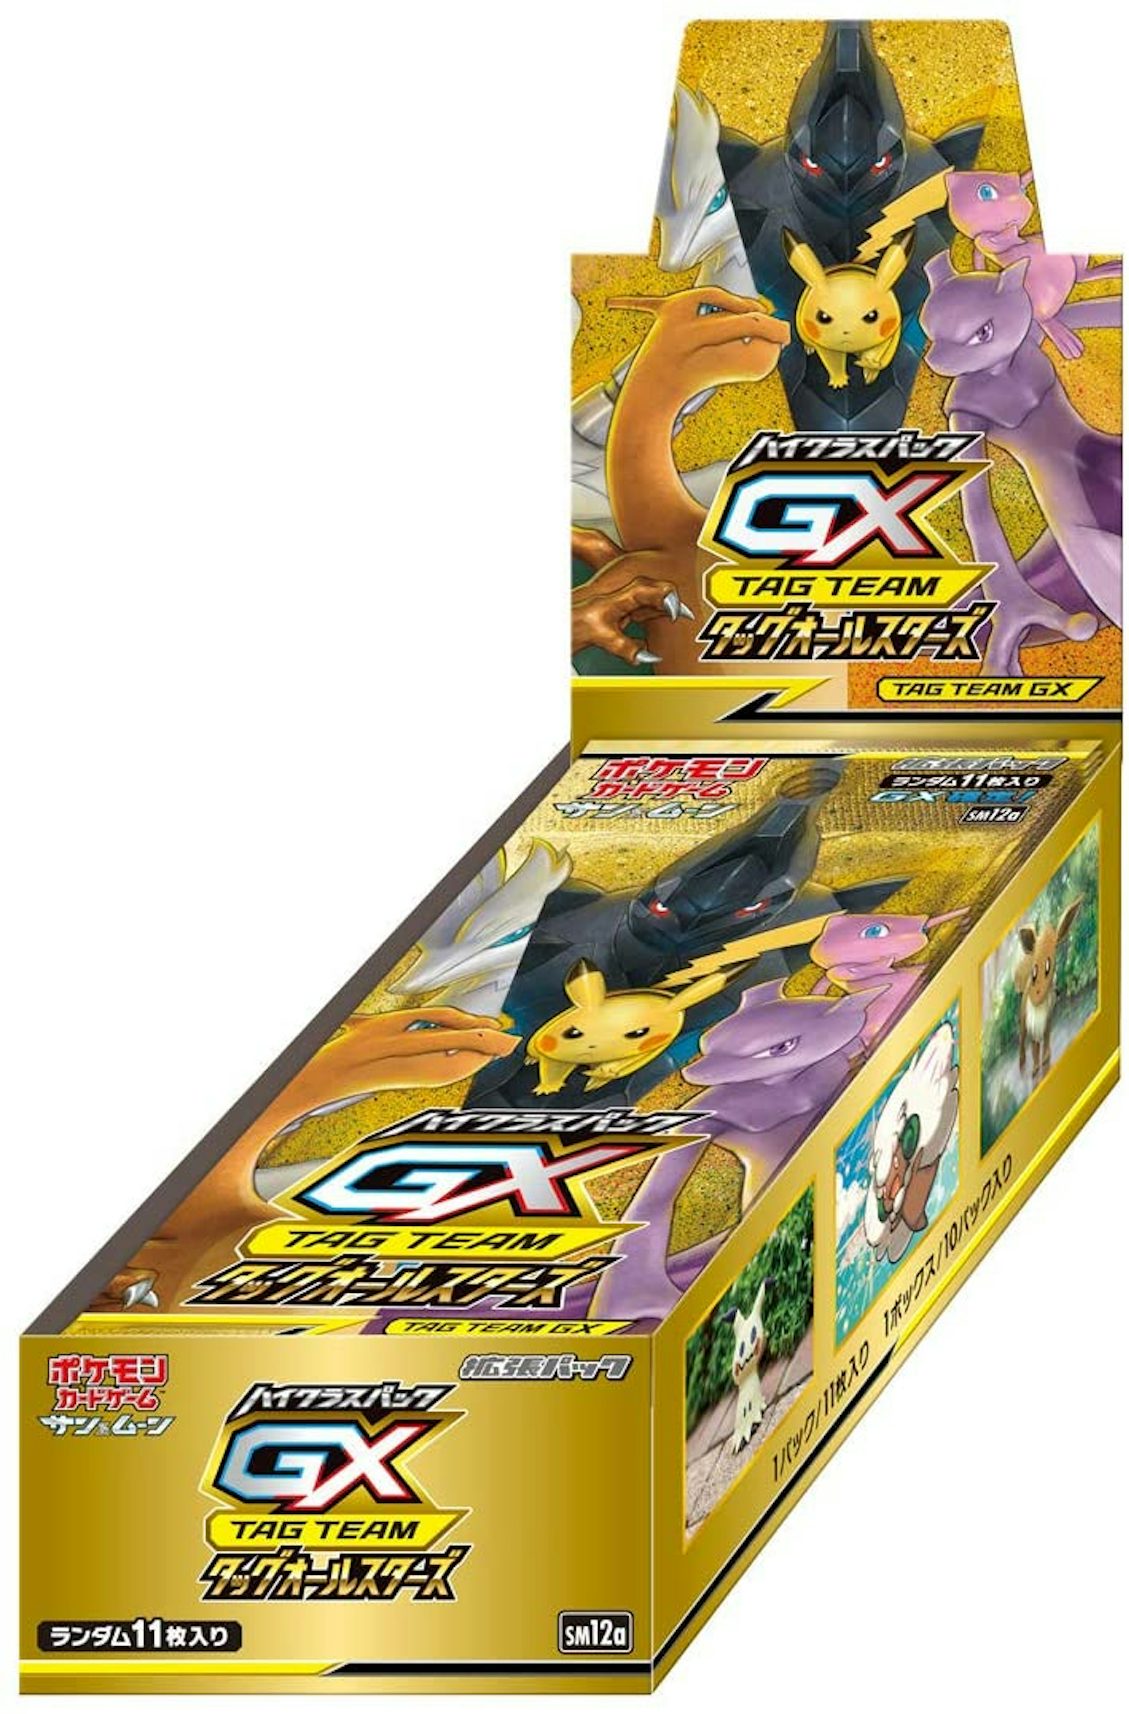 StockX on X: Ready to join the club and build your Pokemon TCG